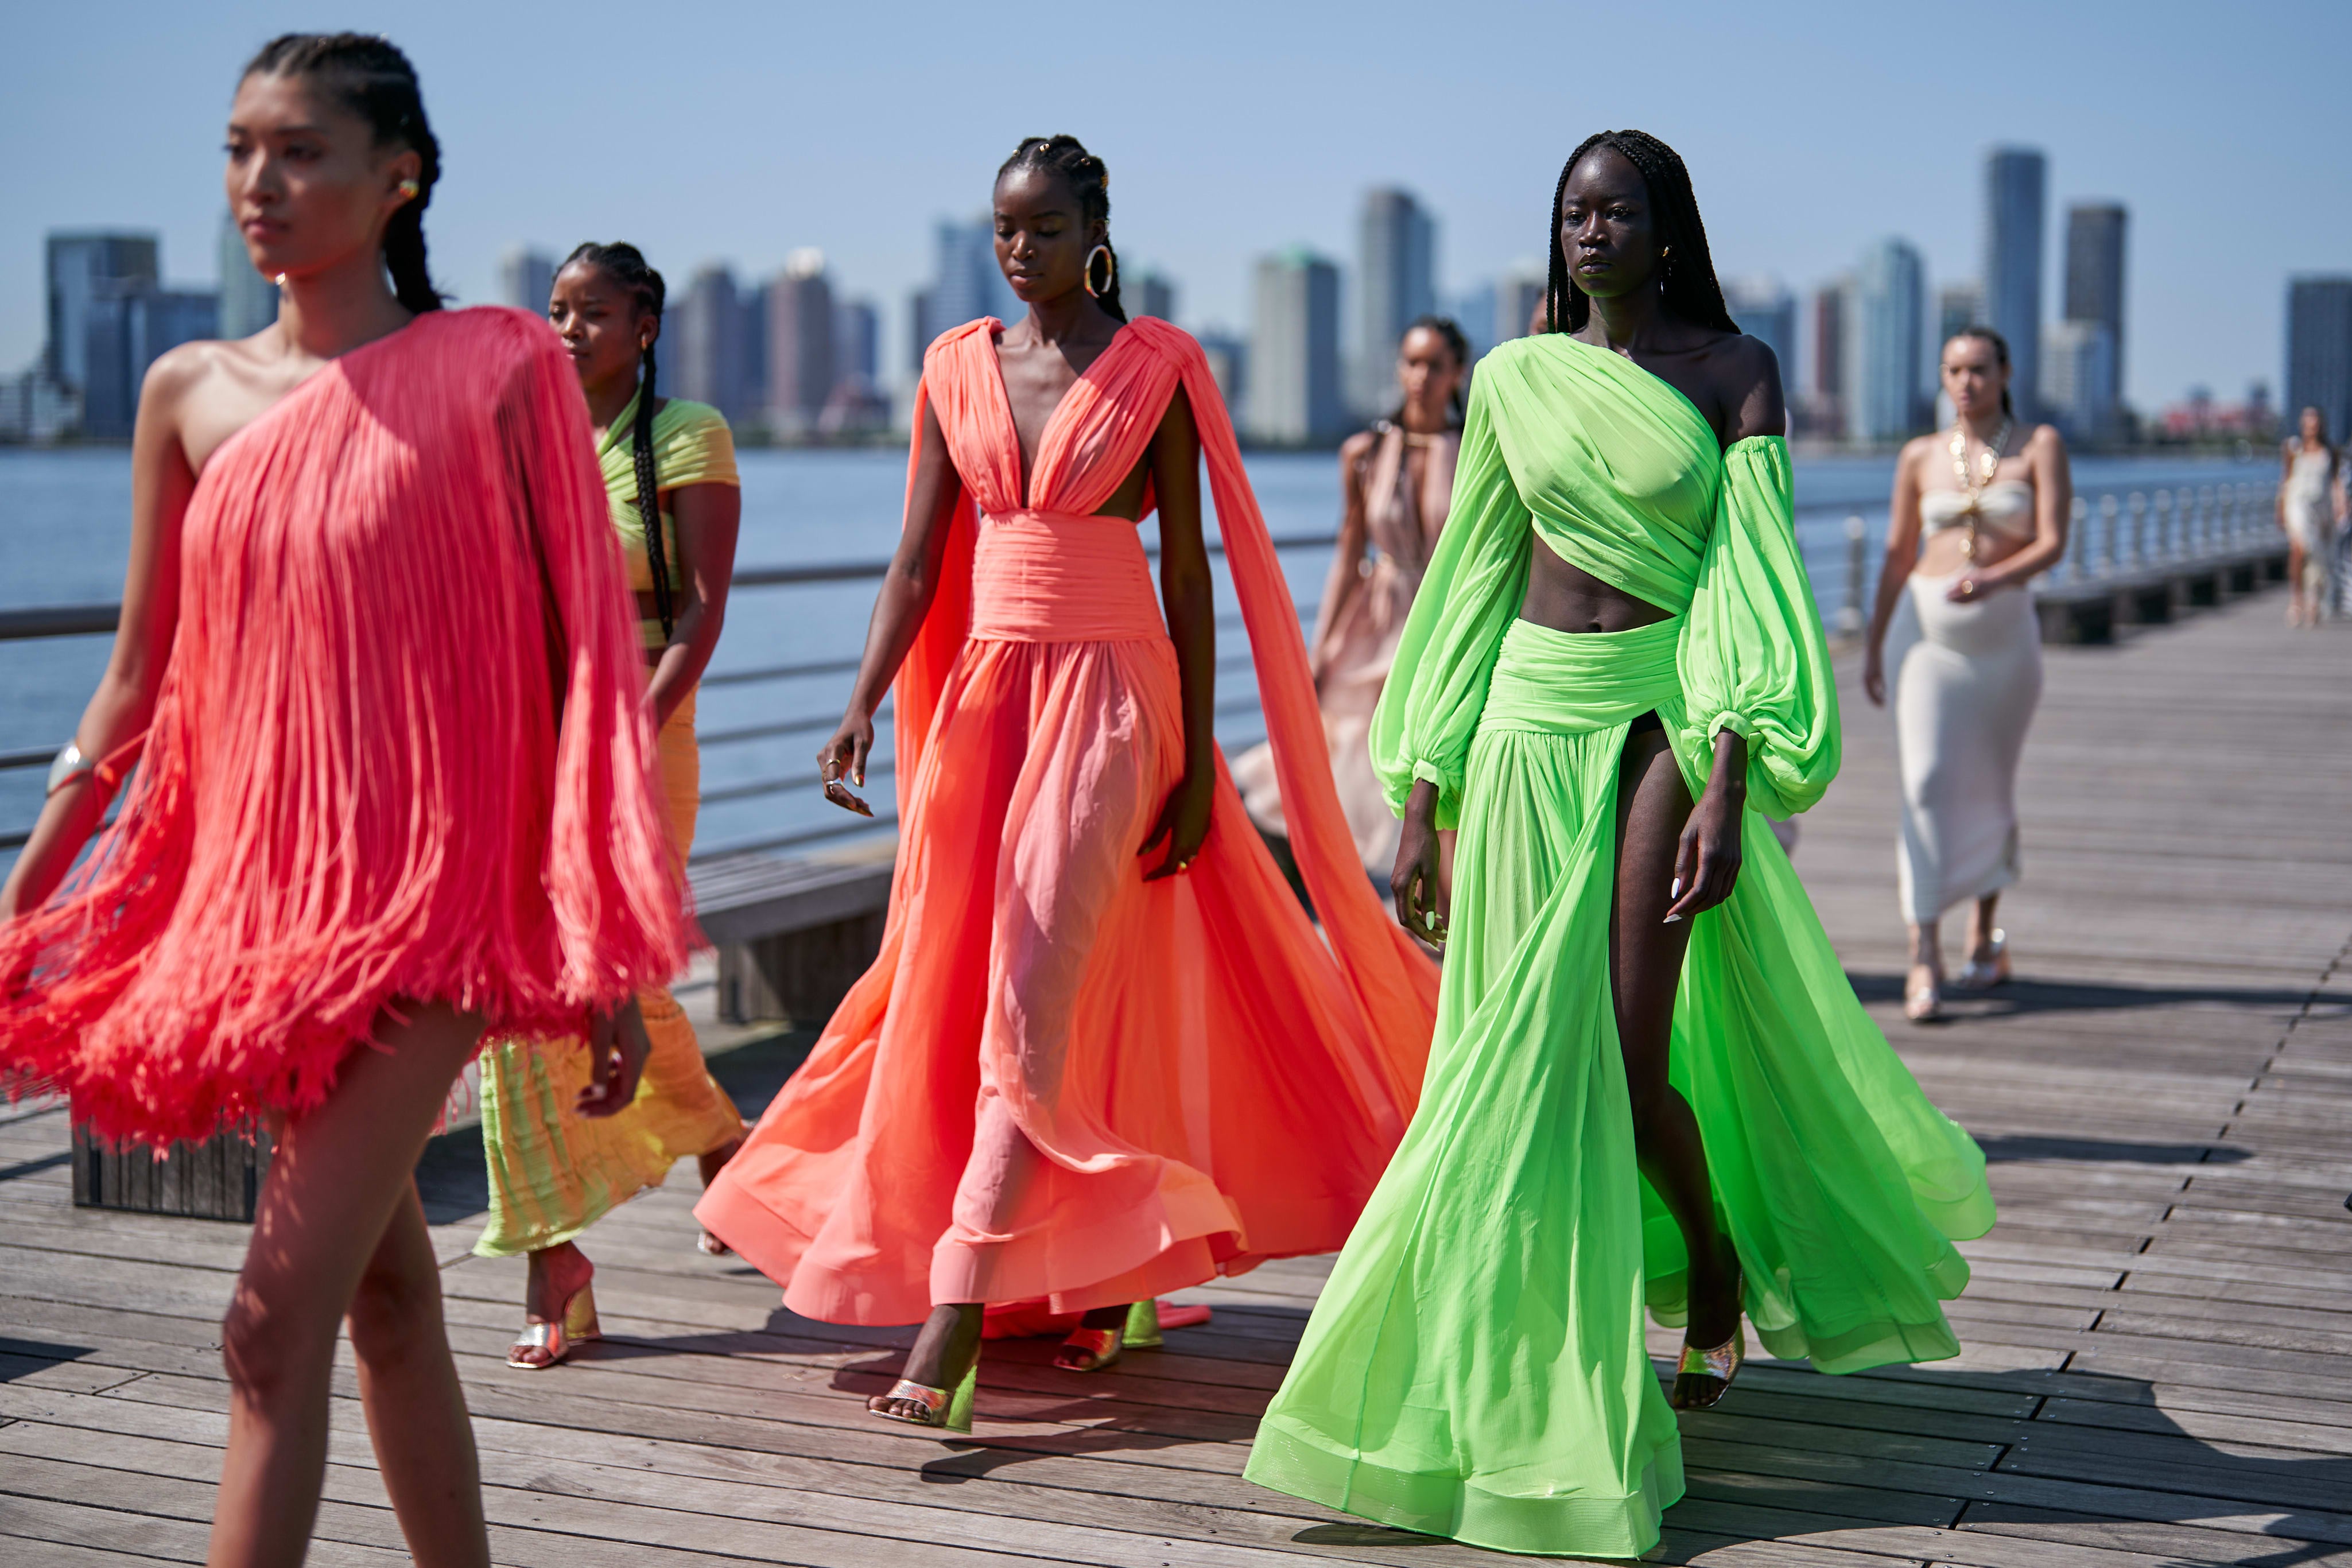 The Best Designers at New York Fashion Week 2022